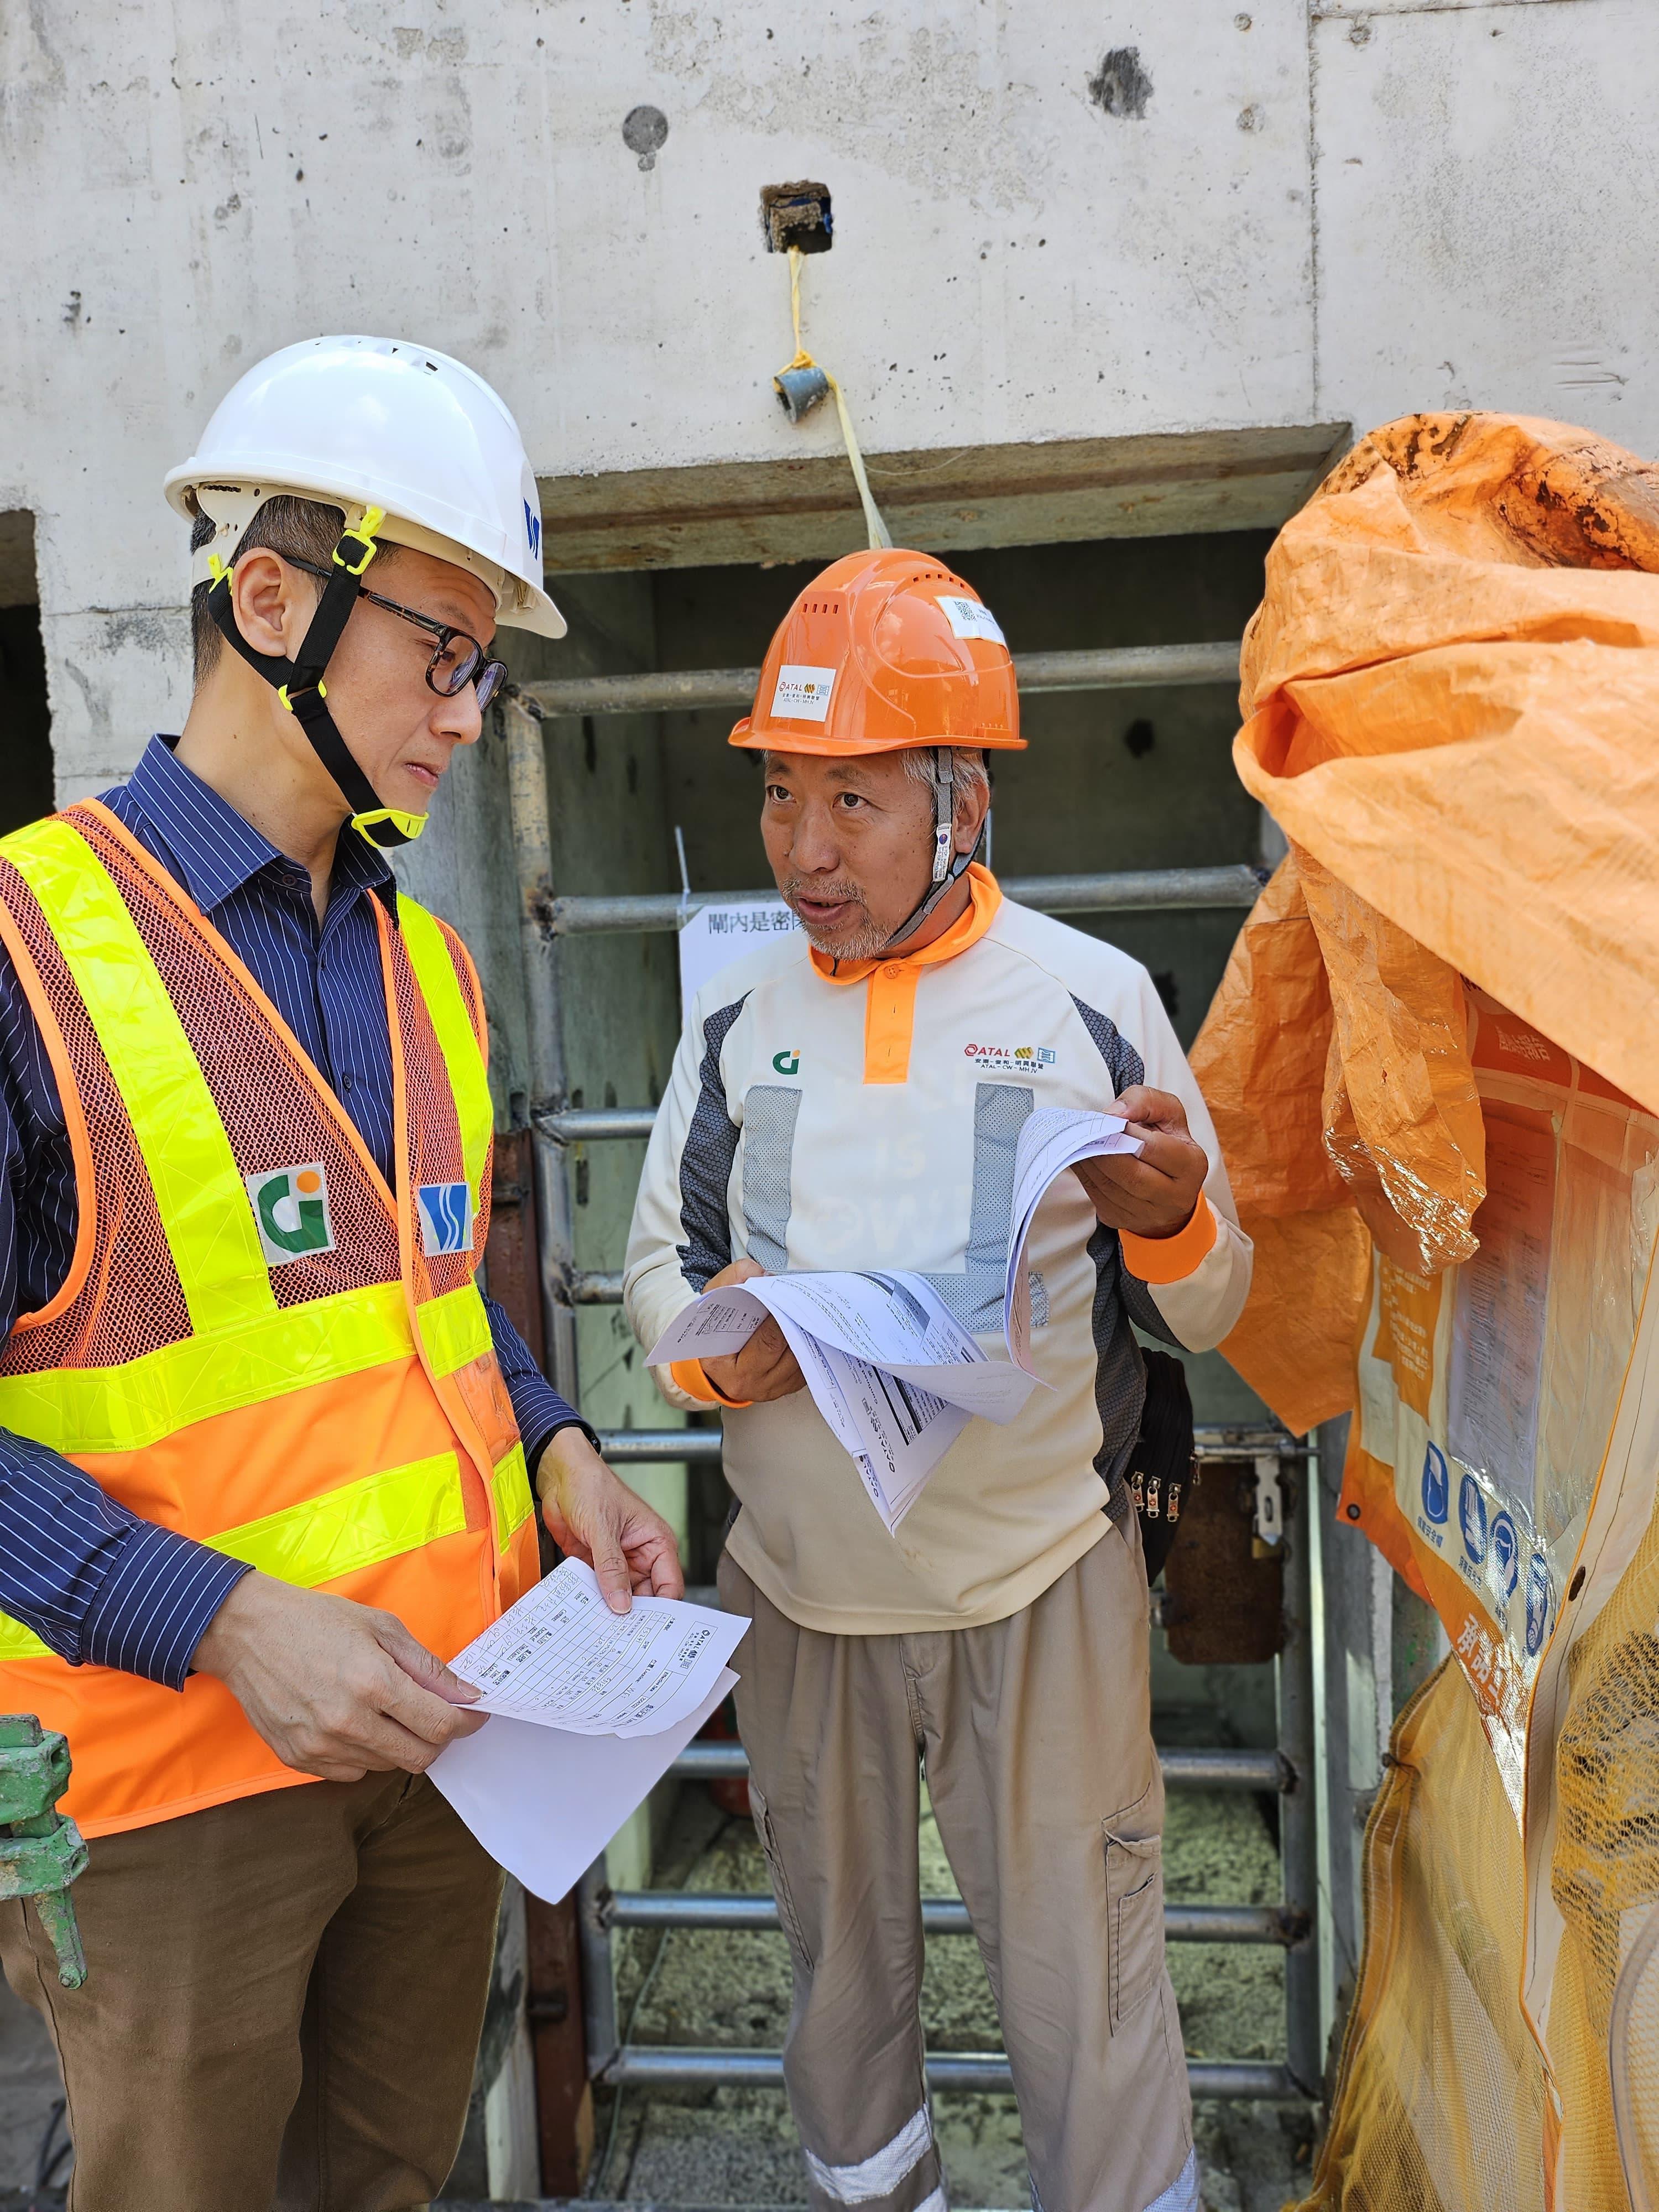 The works departments carried out surprise inspections in the past week, targeting high-risk processes in public works sites, in particular lifting operation and work at height to curb unsafe practices. The Director of Water Supplies, Mr Tony Yau (left), was inspecting a site of the public works under his charge.